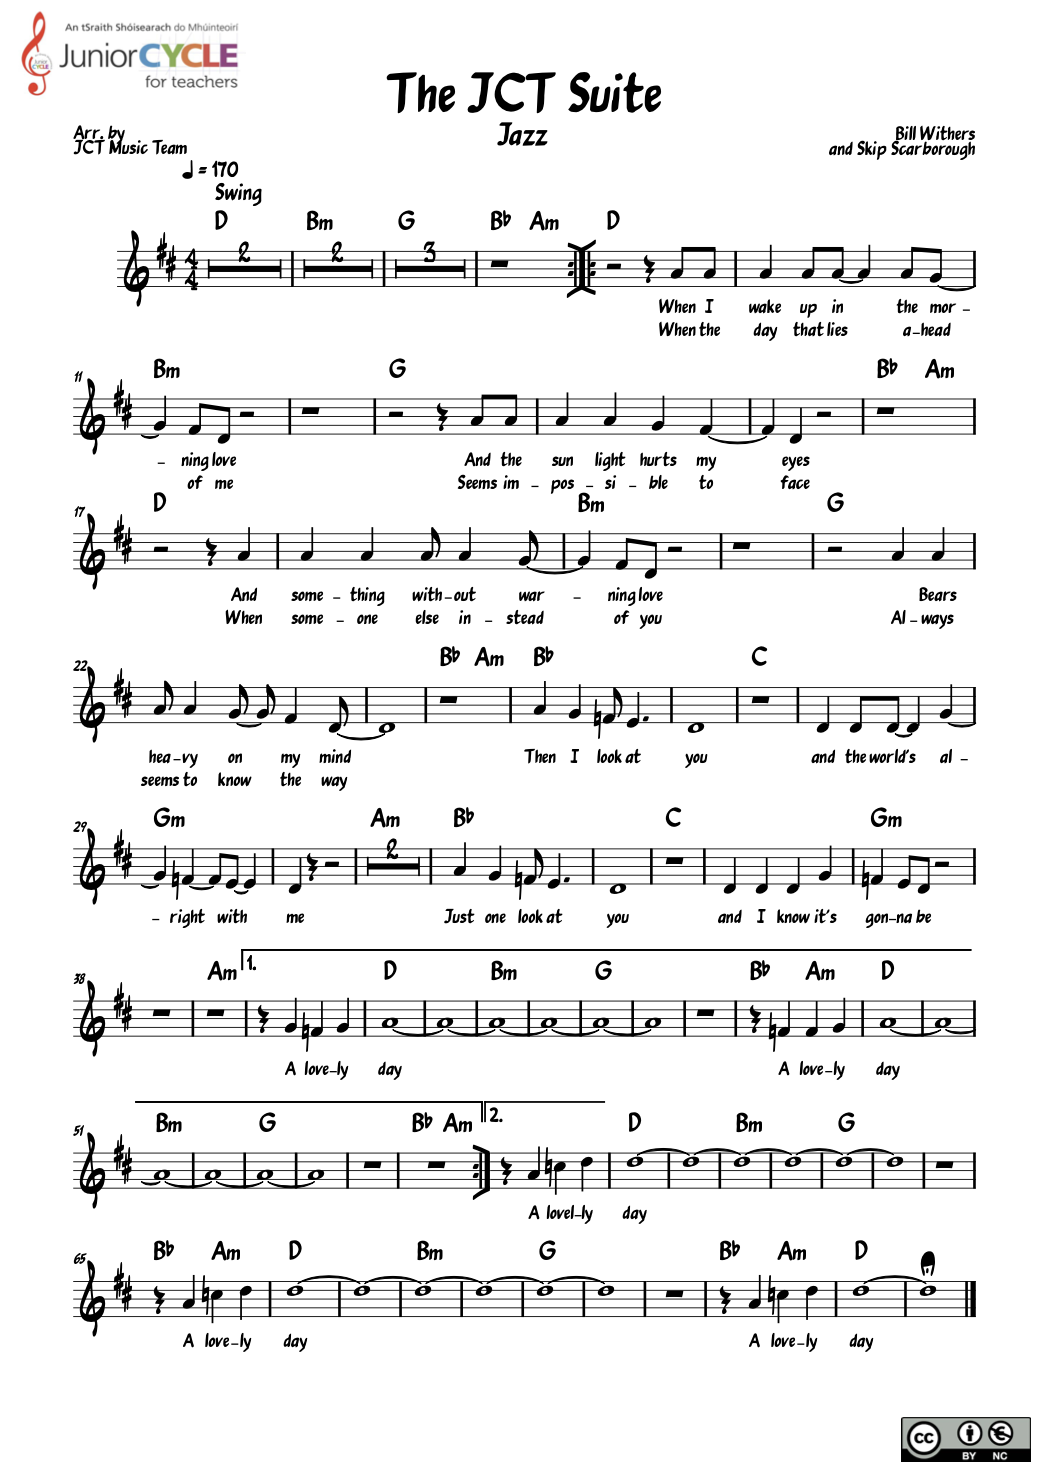 JAZZ: Possible 1st Year Learning - Lead Sheet